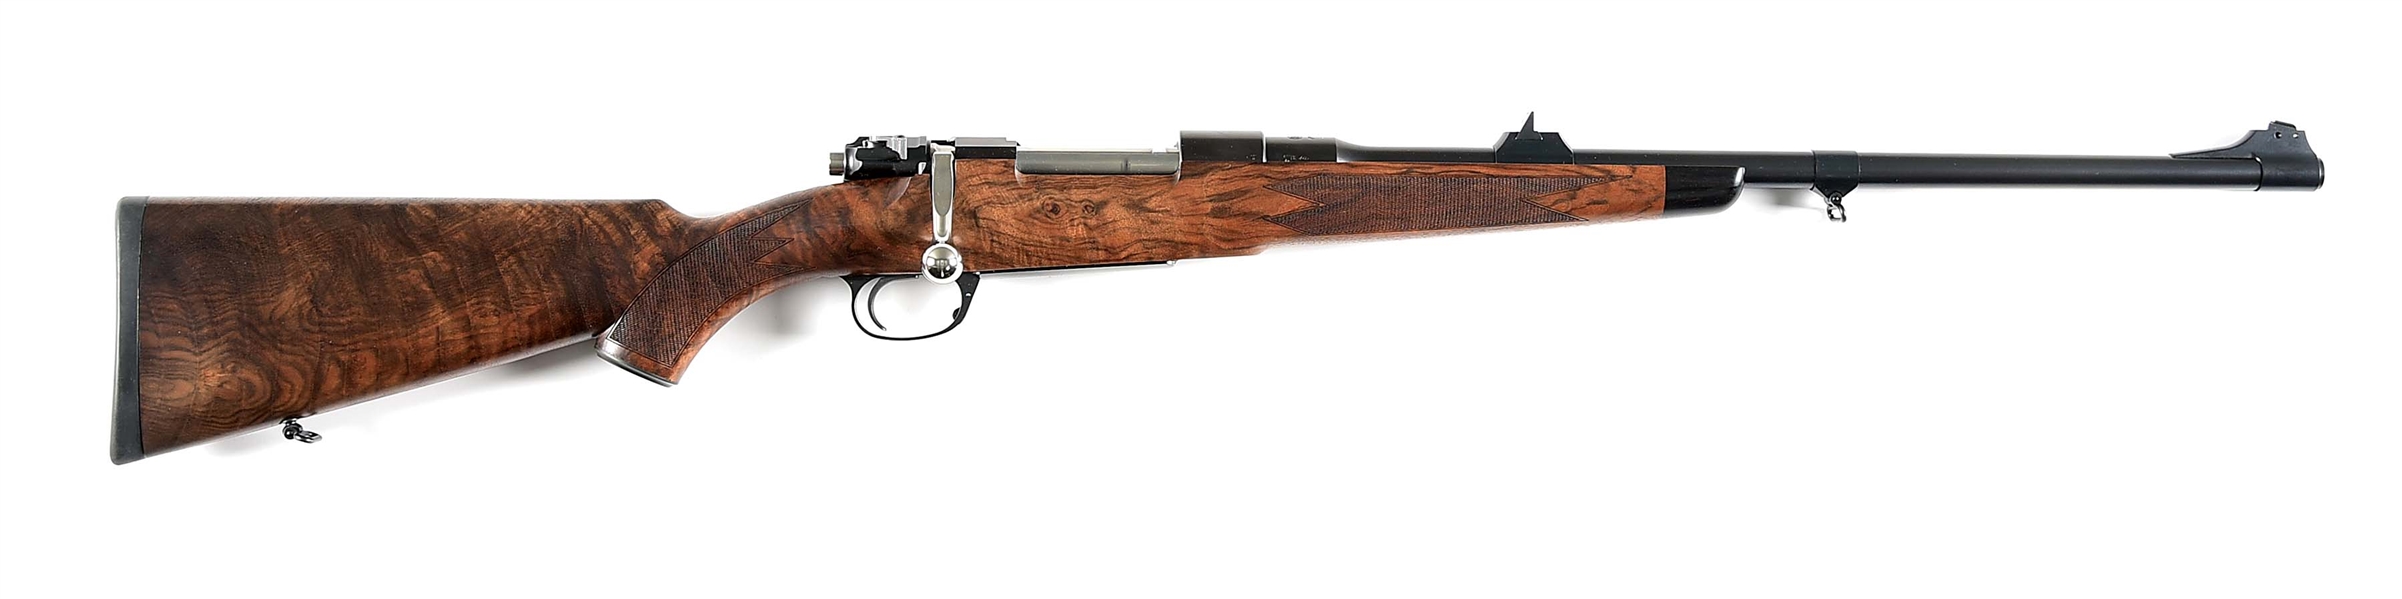 (M) MAUSER M98 STANDARD BOLT ACTION RIFLE IN 8X57MM IS.